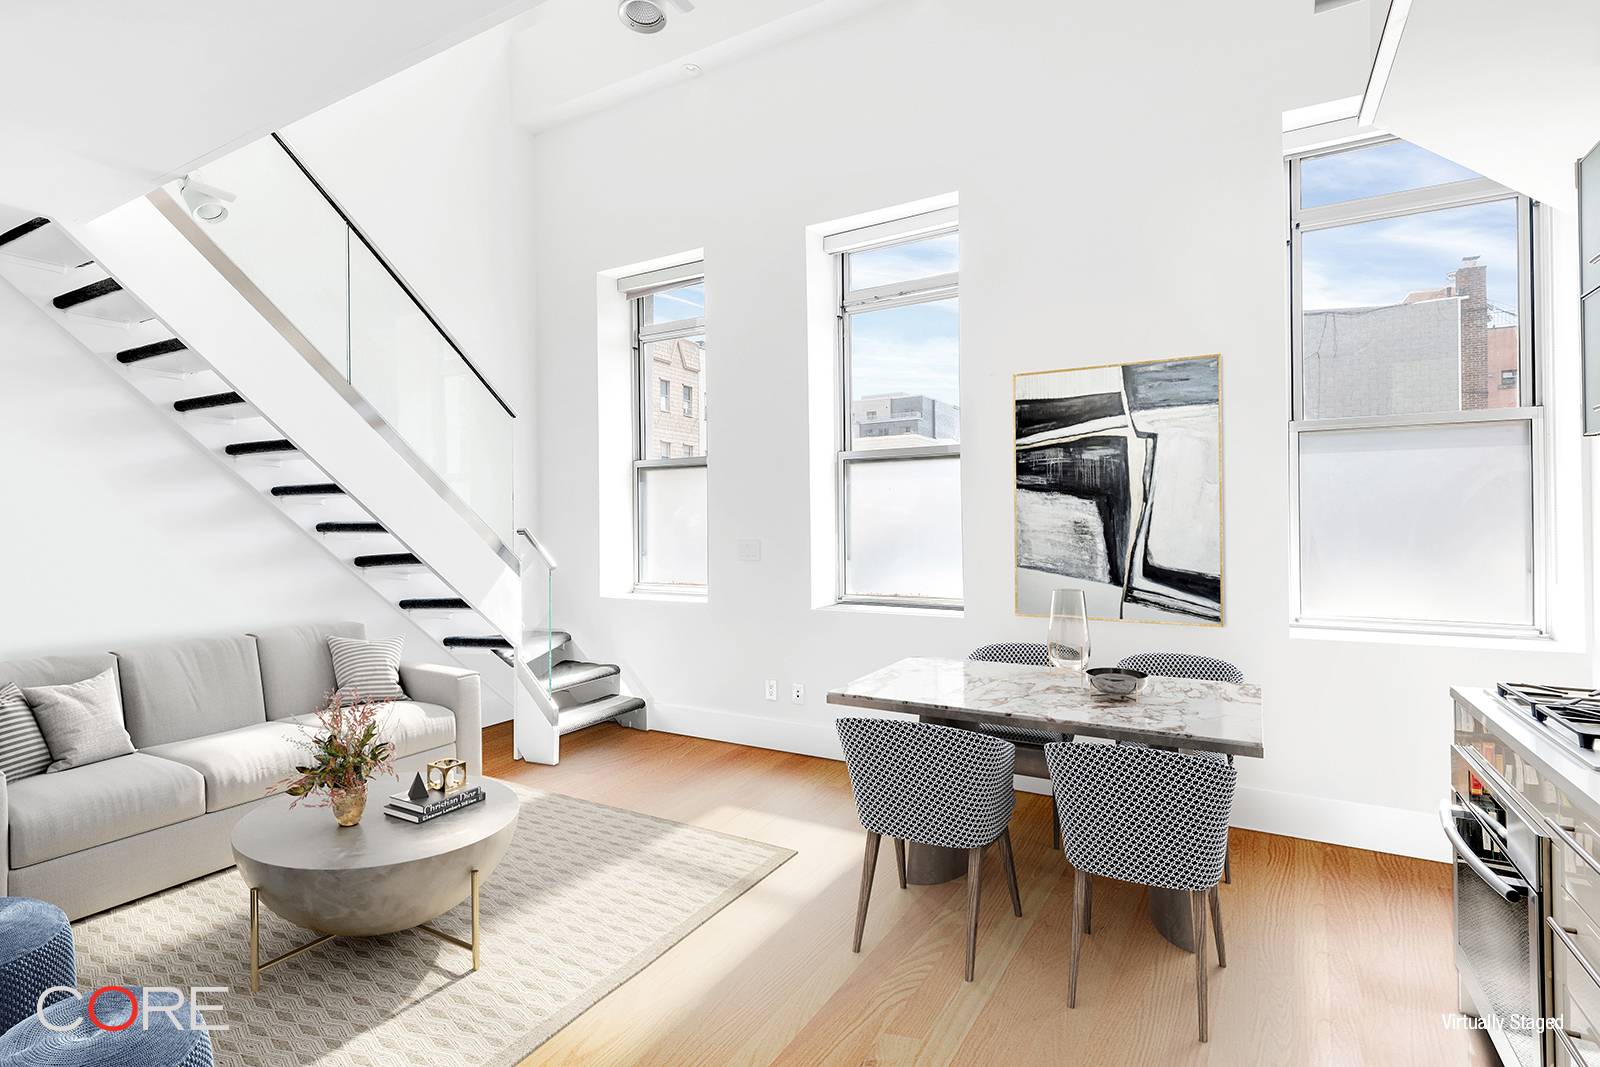 Sunlit triplex perfect for modern day living located right across McCarren Park.